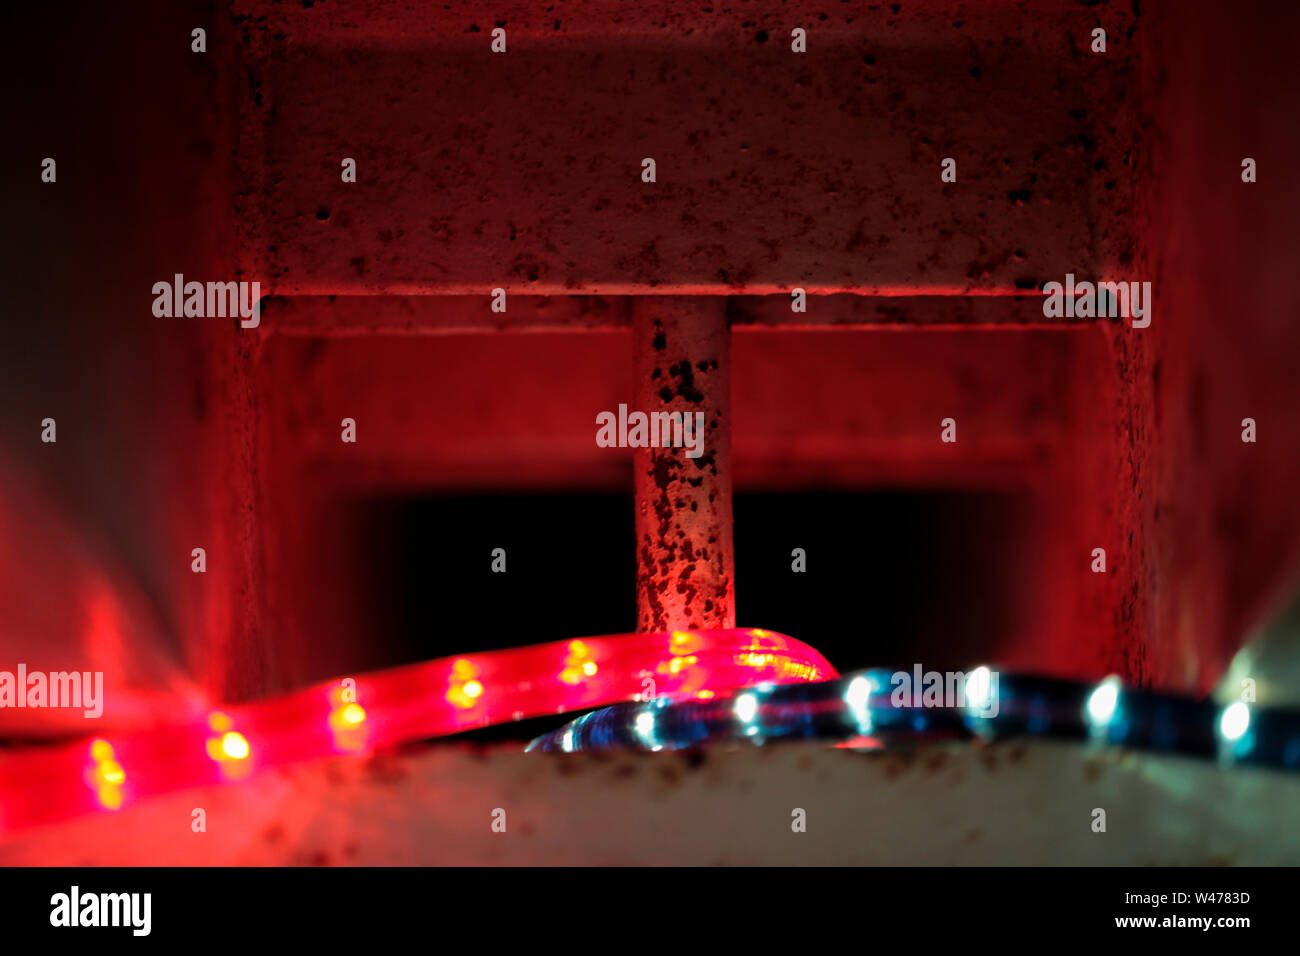 LED light strings in a metall shaft one is blue the other red Stock Photo